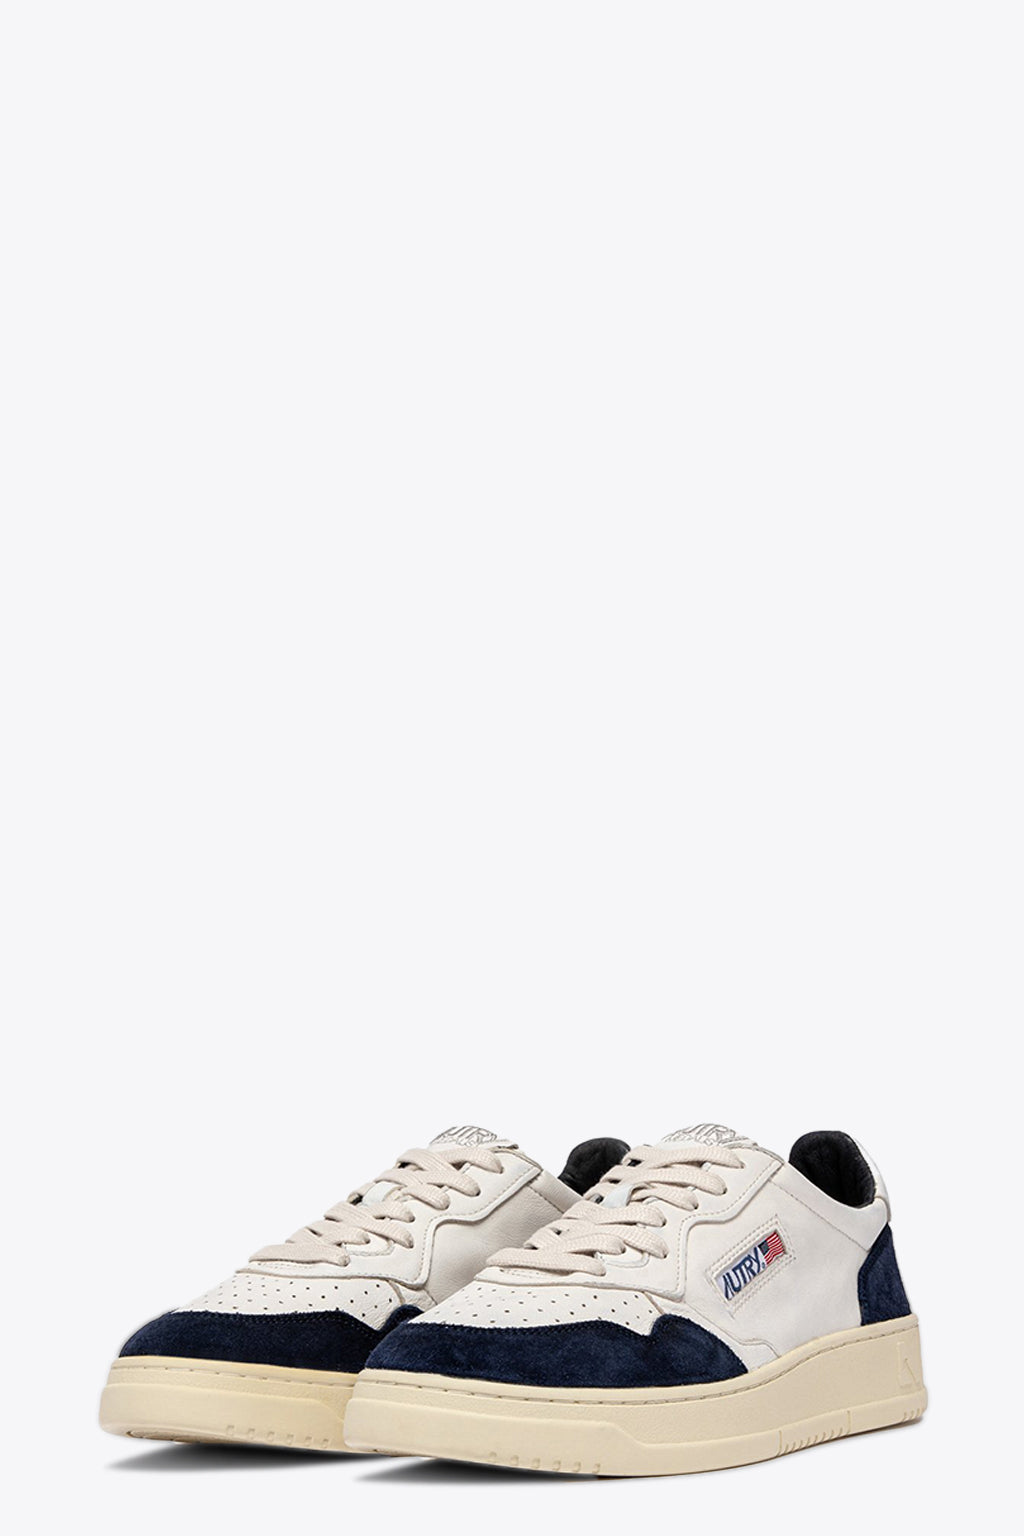 alt-image__White-leather-low-sneaker-with-blue-suede-detail---Medalist